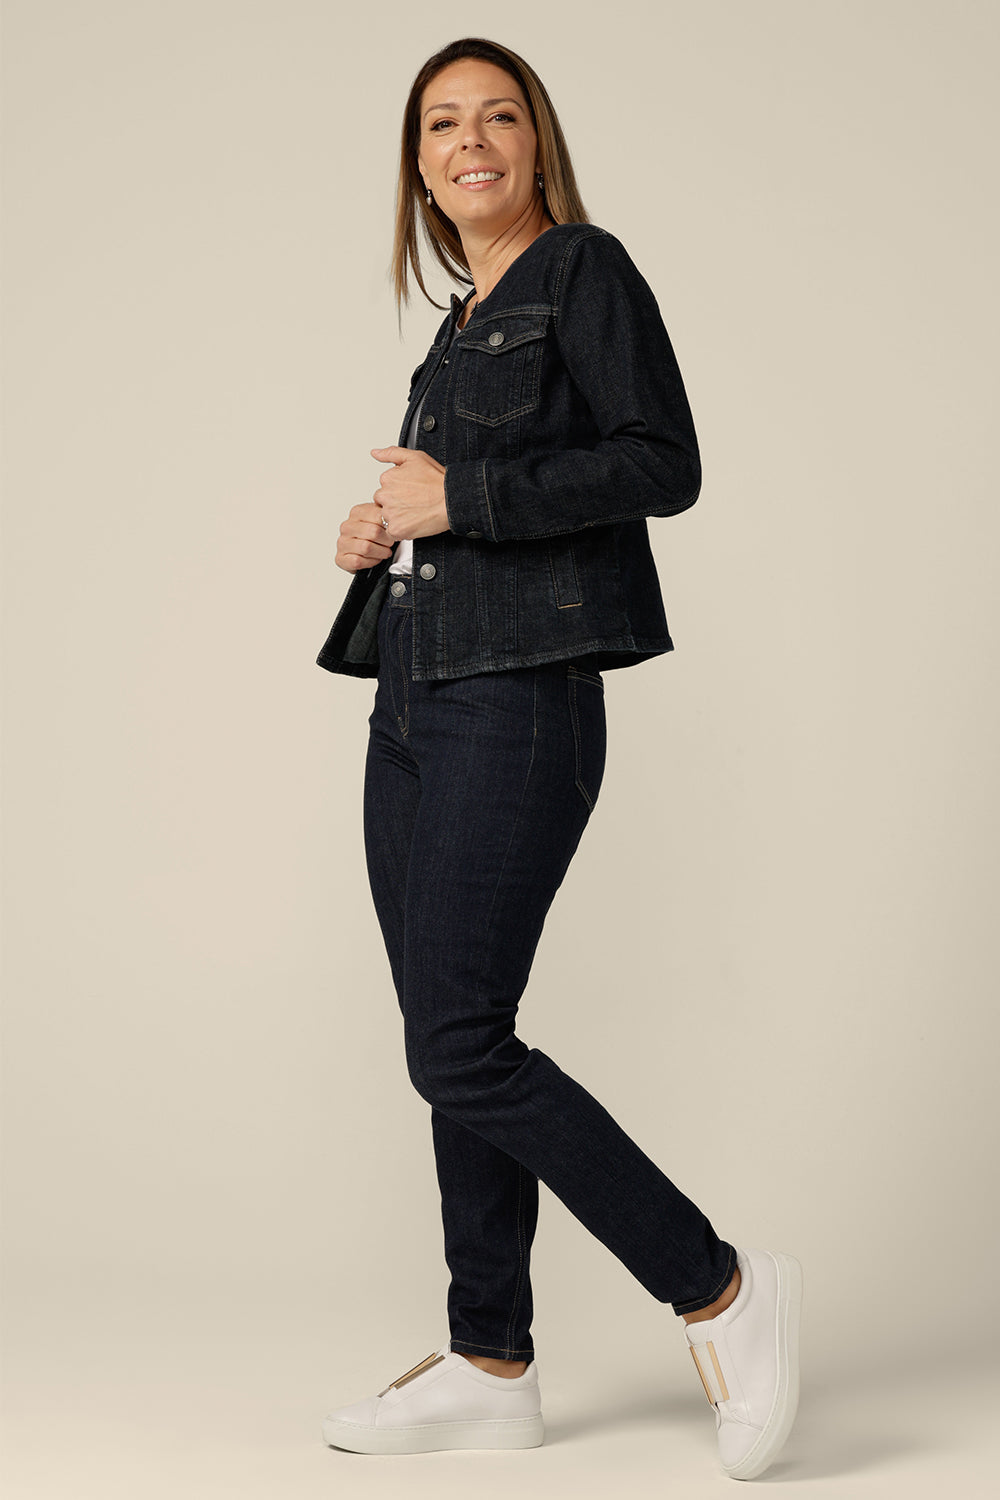 A collarless denim jacket in size 8 is worn with white bamboo jersey top and super-stretch skinny jeans. Ethically made in collaboration with Outland Denim, this denim jacket is tailored to fit women in sizes 8 to 24 by Australian and New Zealand women's clothing label, L&F.